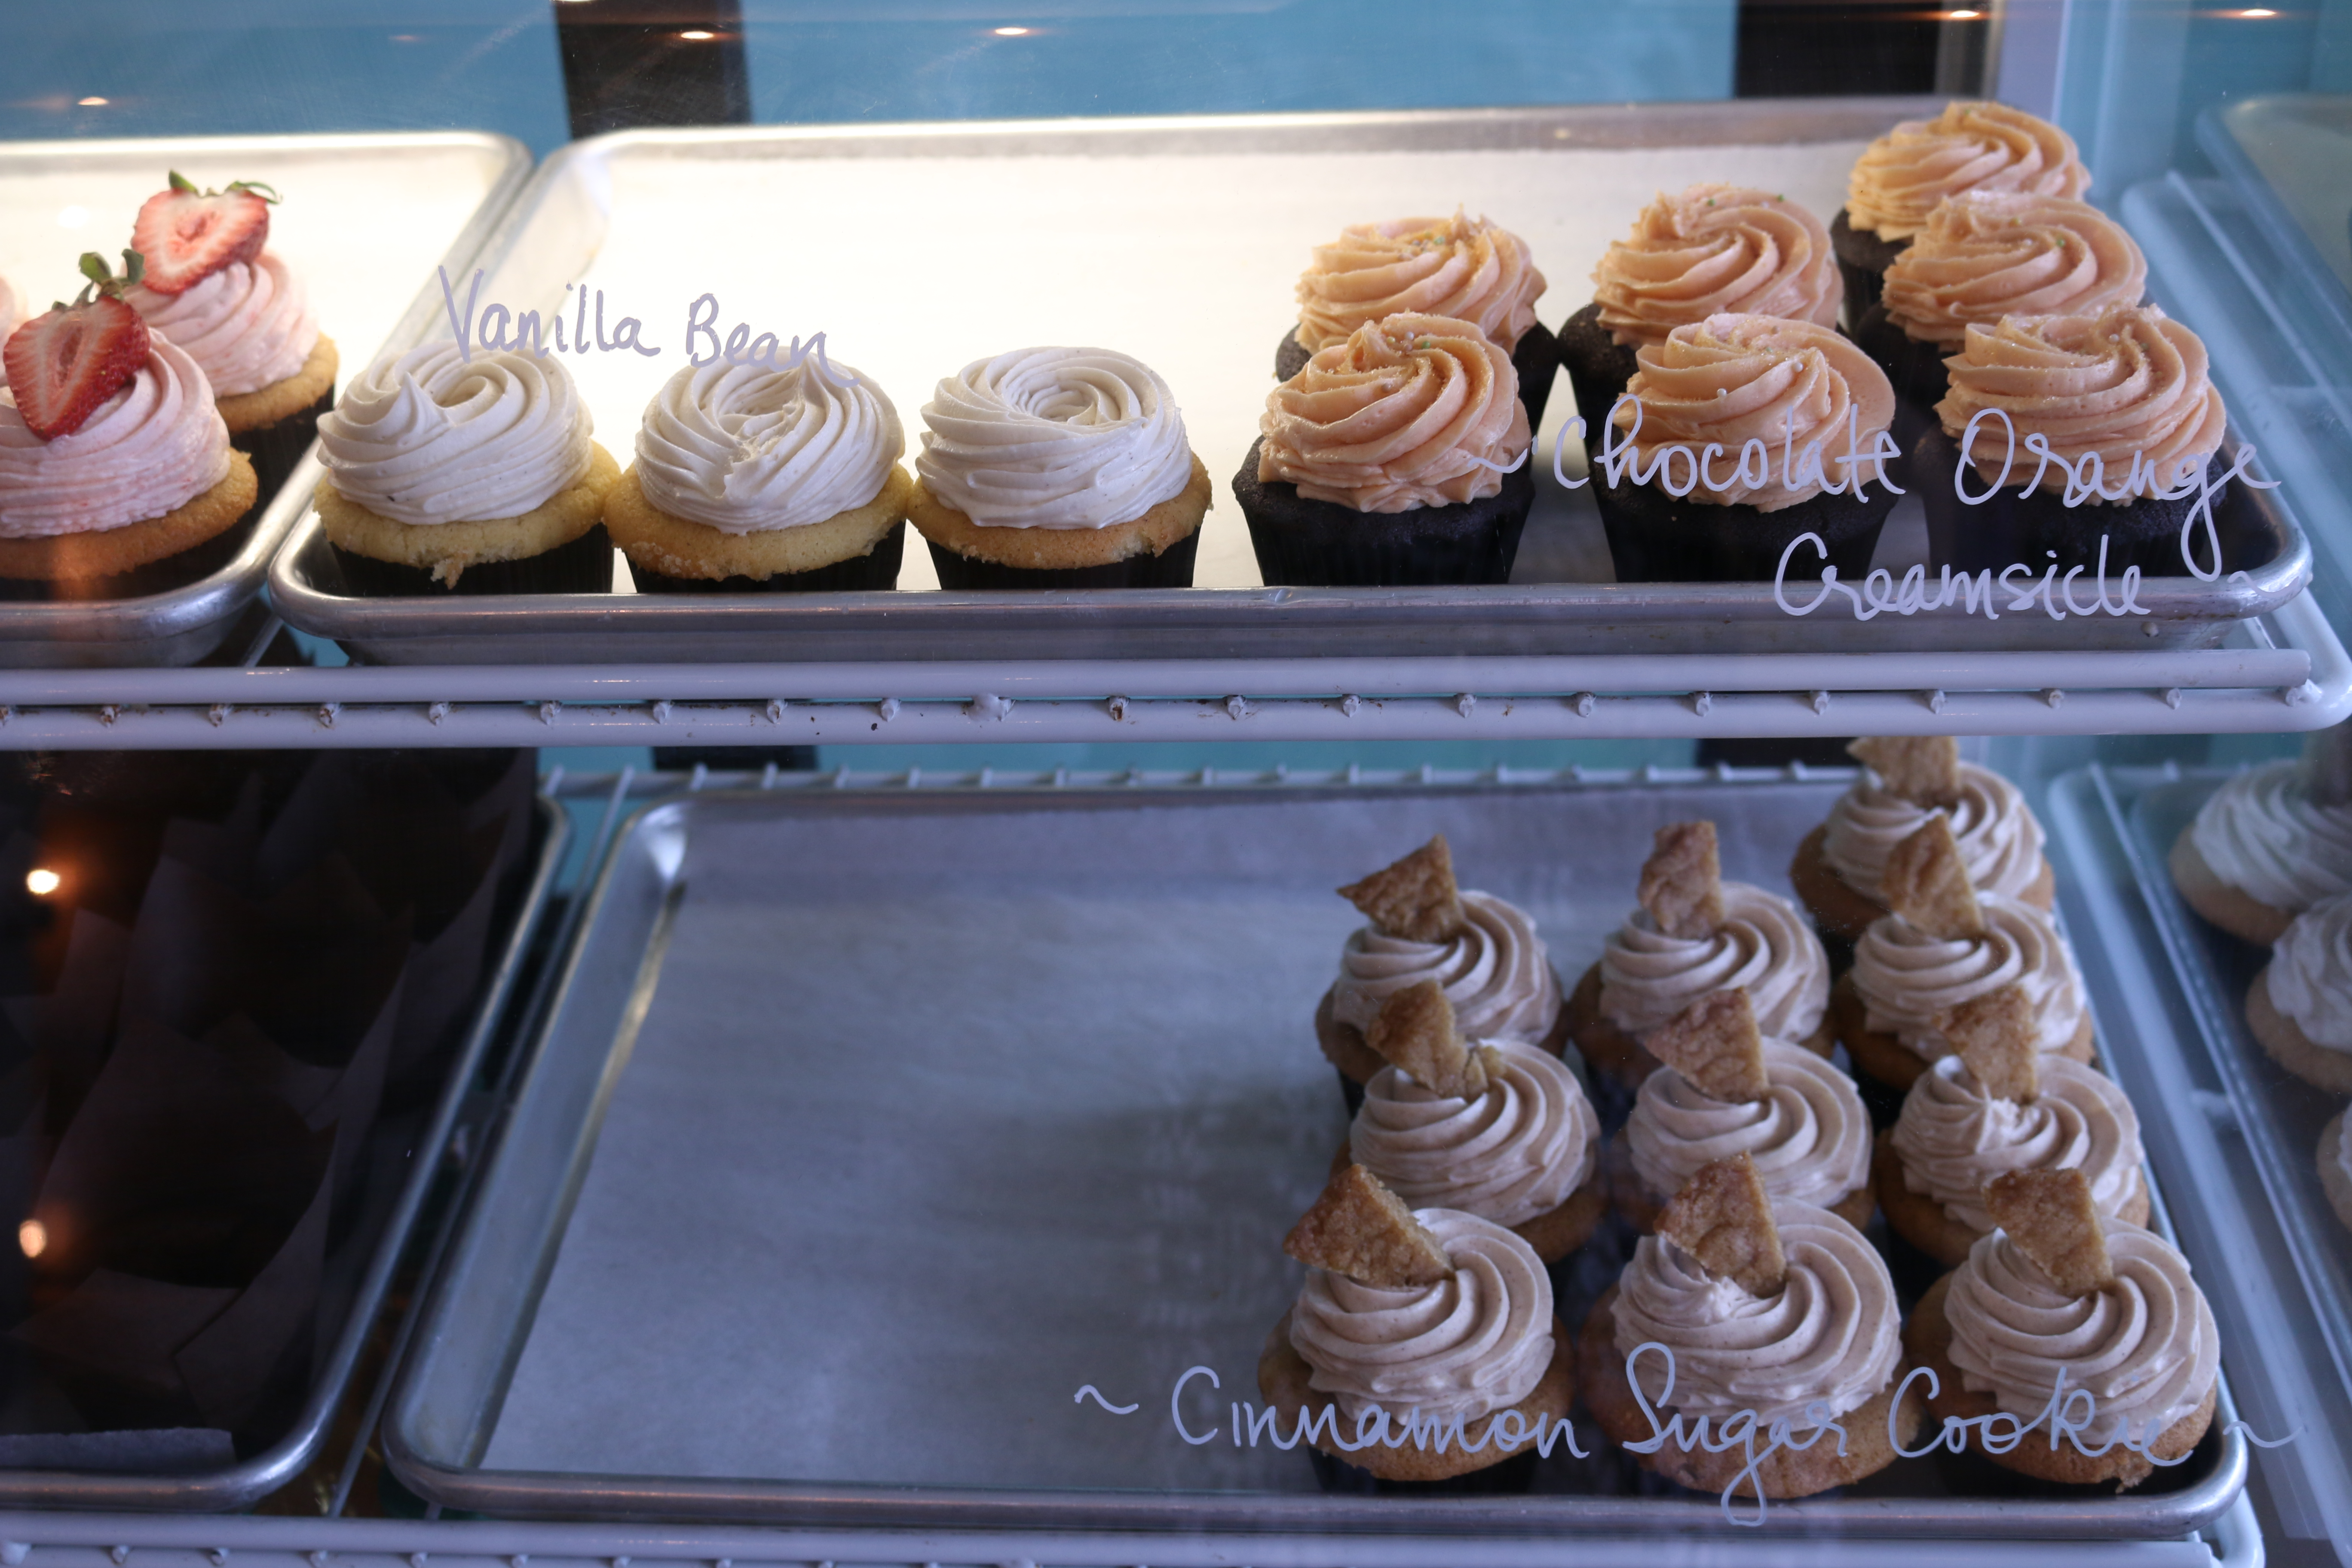 Cupcakes inside Almond Butterfly. Flavours from left to right, top row: strawberry milkshake, vanilla bean, orange creamsicle, cinnamon sugar cookie.  